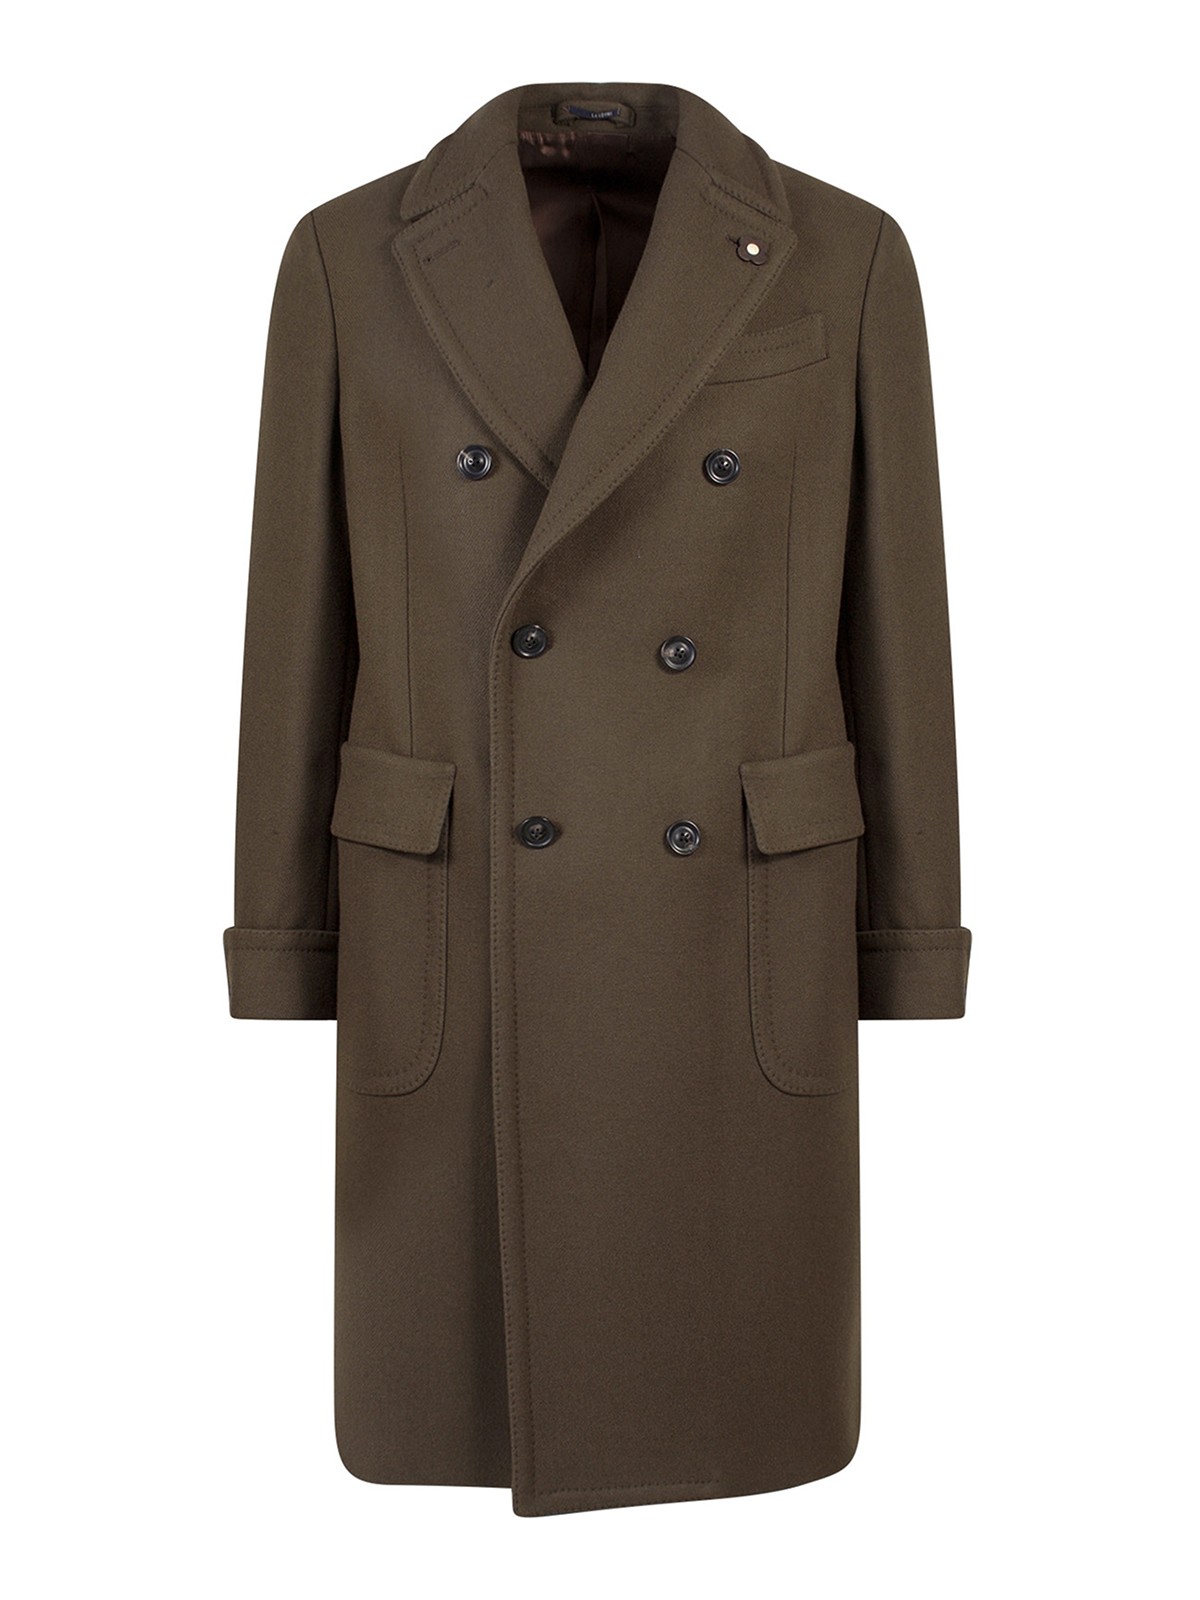 BOSS - Double-breasted trench coat in Italian stretch cotton